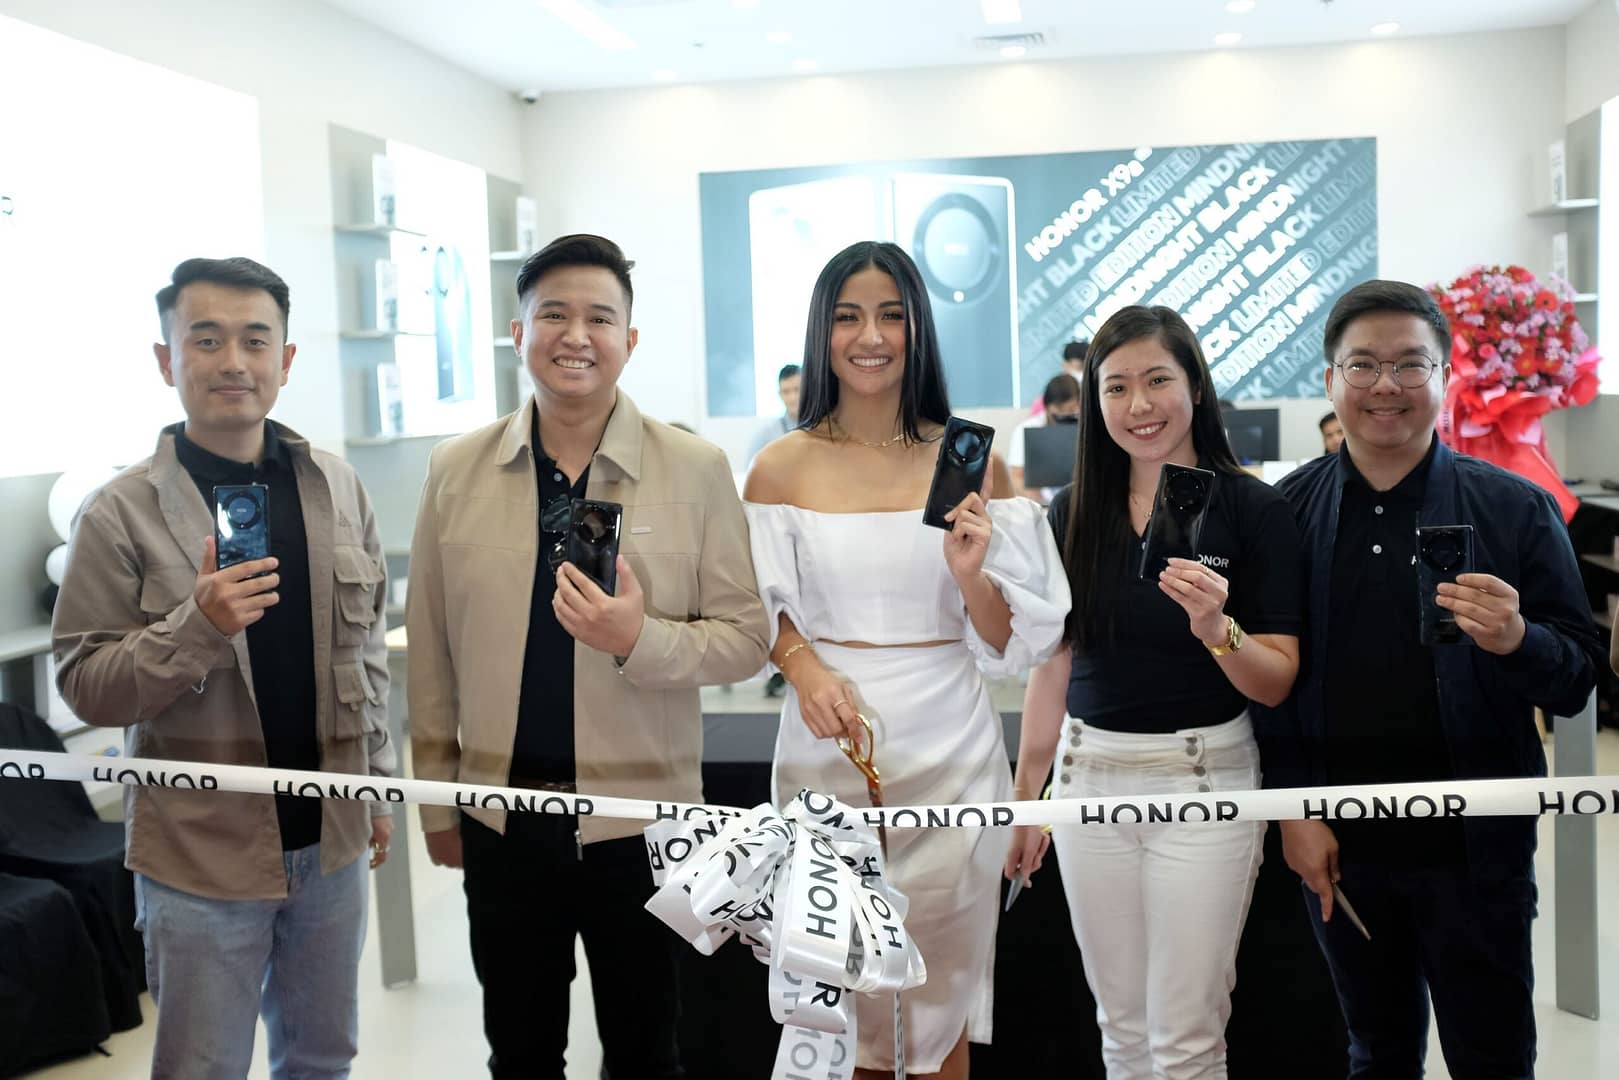 HONOR GTM Manager Steven Yan, HONOR Star Sanya Lopez, Vice President Stephen Cheng, Brand Marketing Manager Joepy Libo-on, and PR Manager Pao Oga